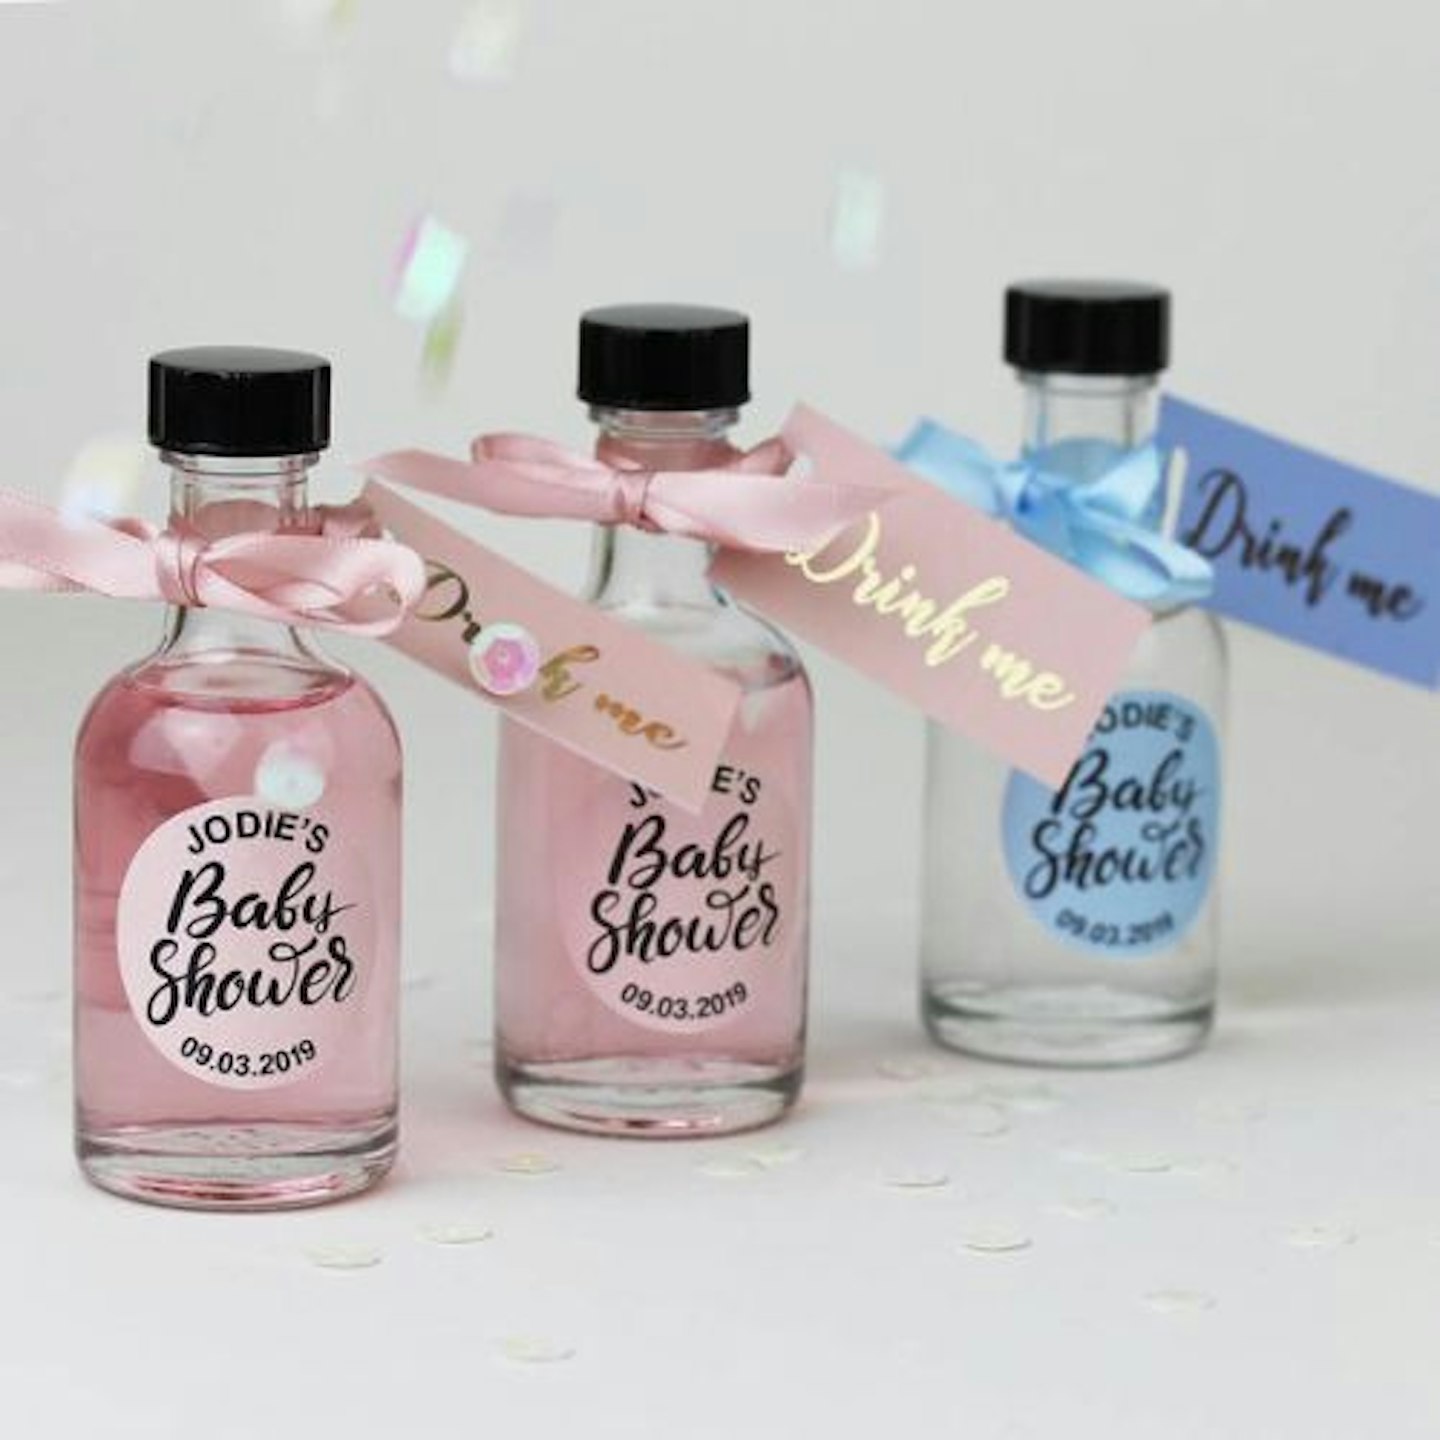 https://www.notonthehighstreet.com/hearthandheritage/product/personalised-baby-shower-favours-containing-pink-gin